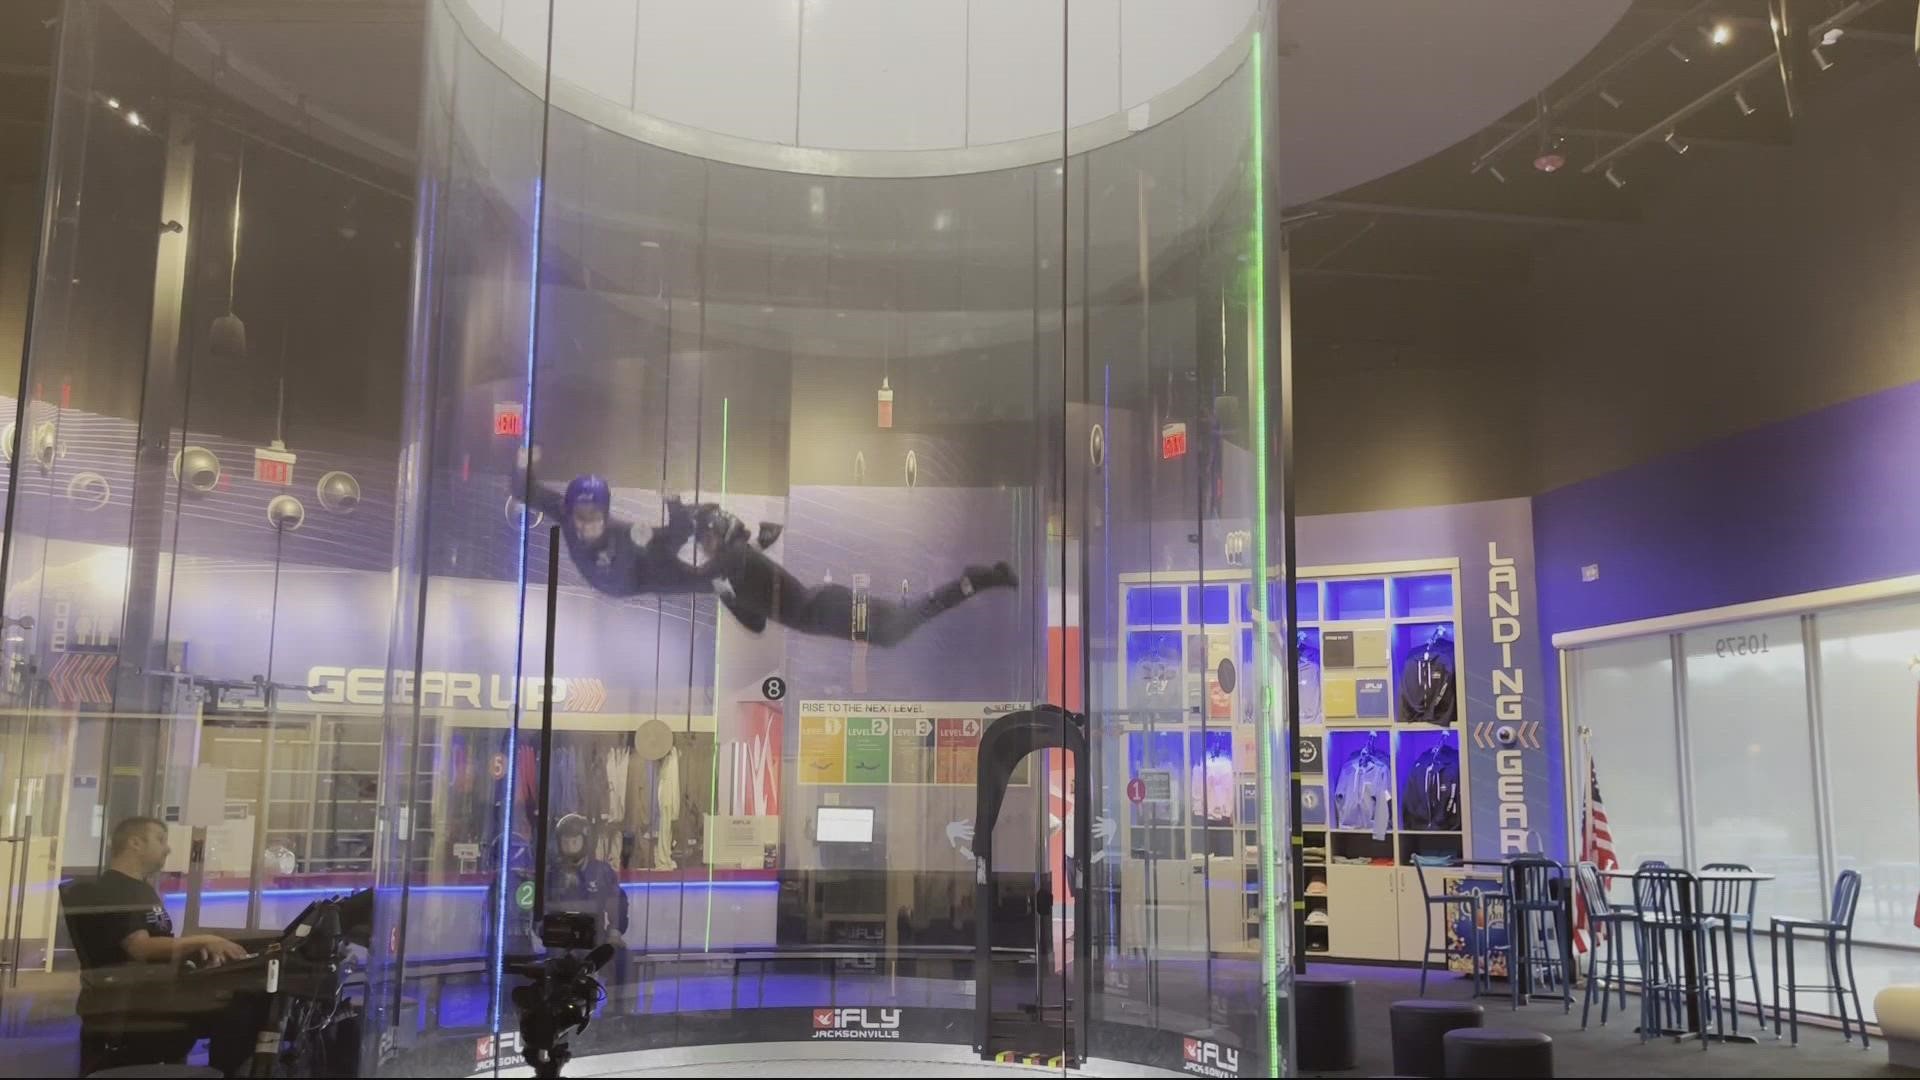 With the purchase of an adult ticket, a child can try indoor skydiving for free this month.